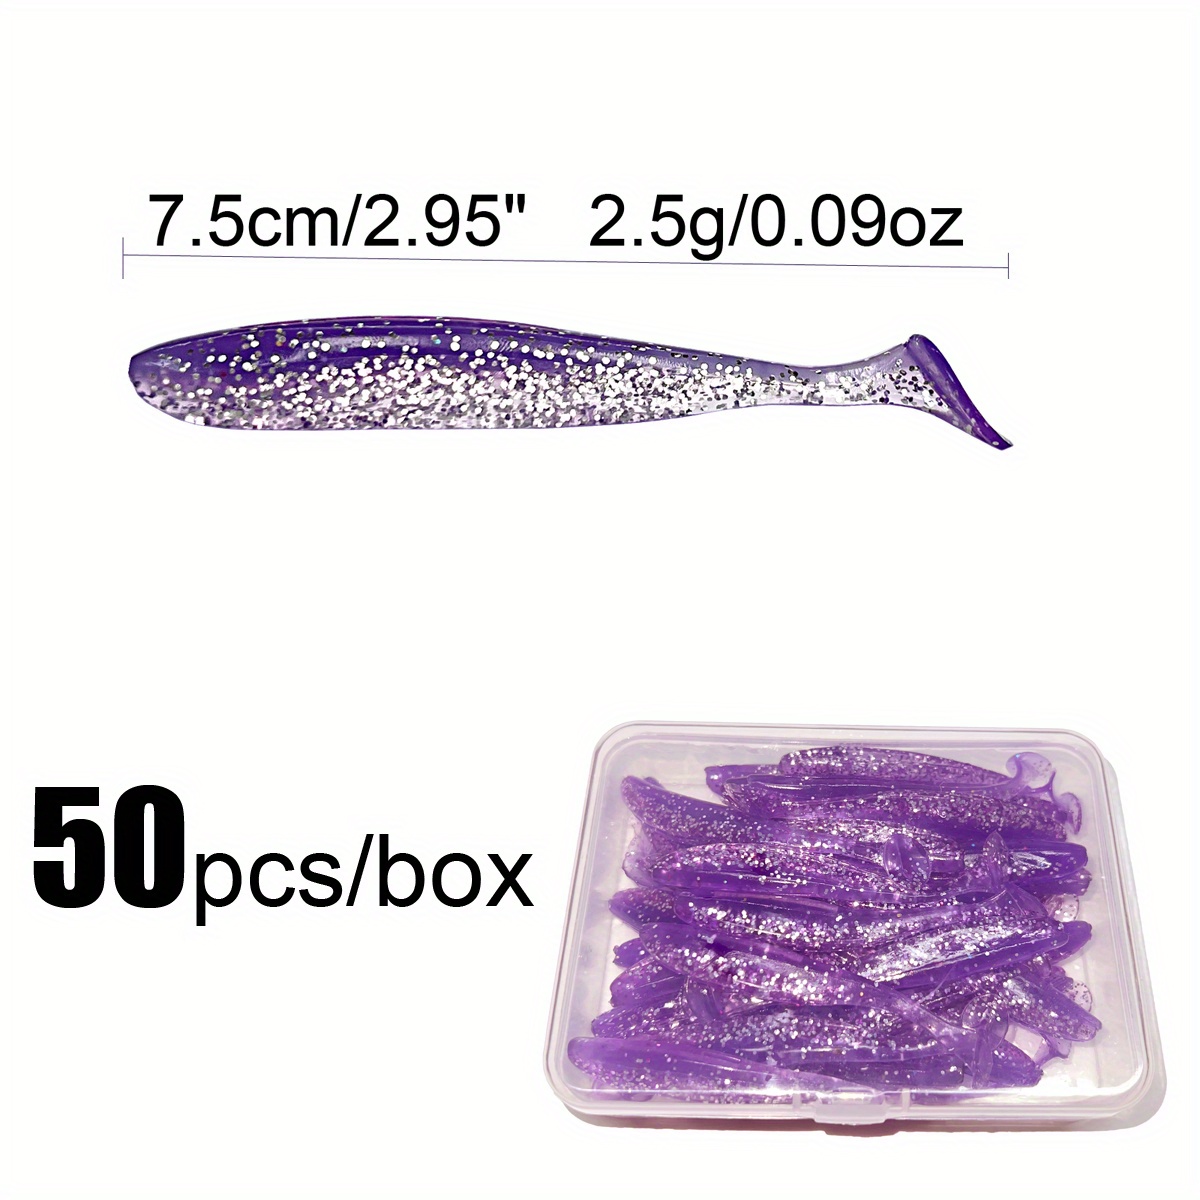 Almost Alive Lures 4 Pack 4 Soft Shad Paddle Tail Bait Purple [CTTU413] -  $5.99 : Almost Alive Lures, The best there ever was.